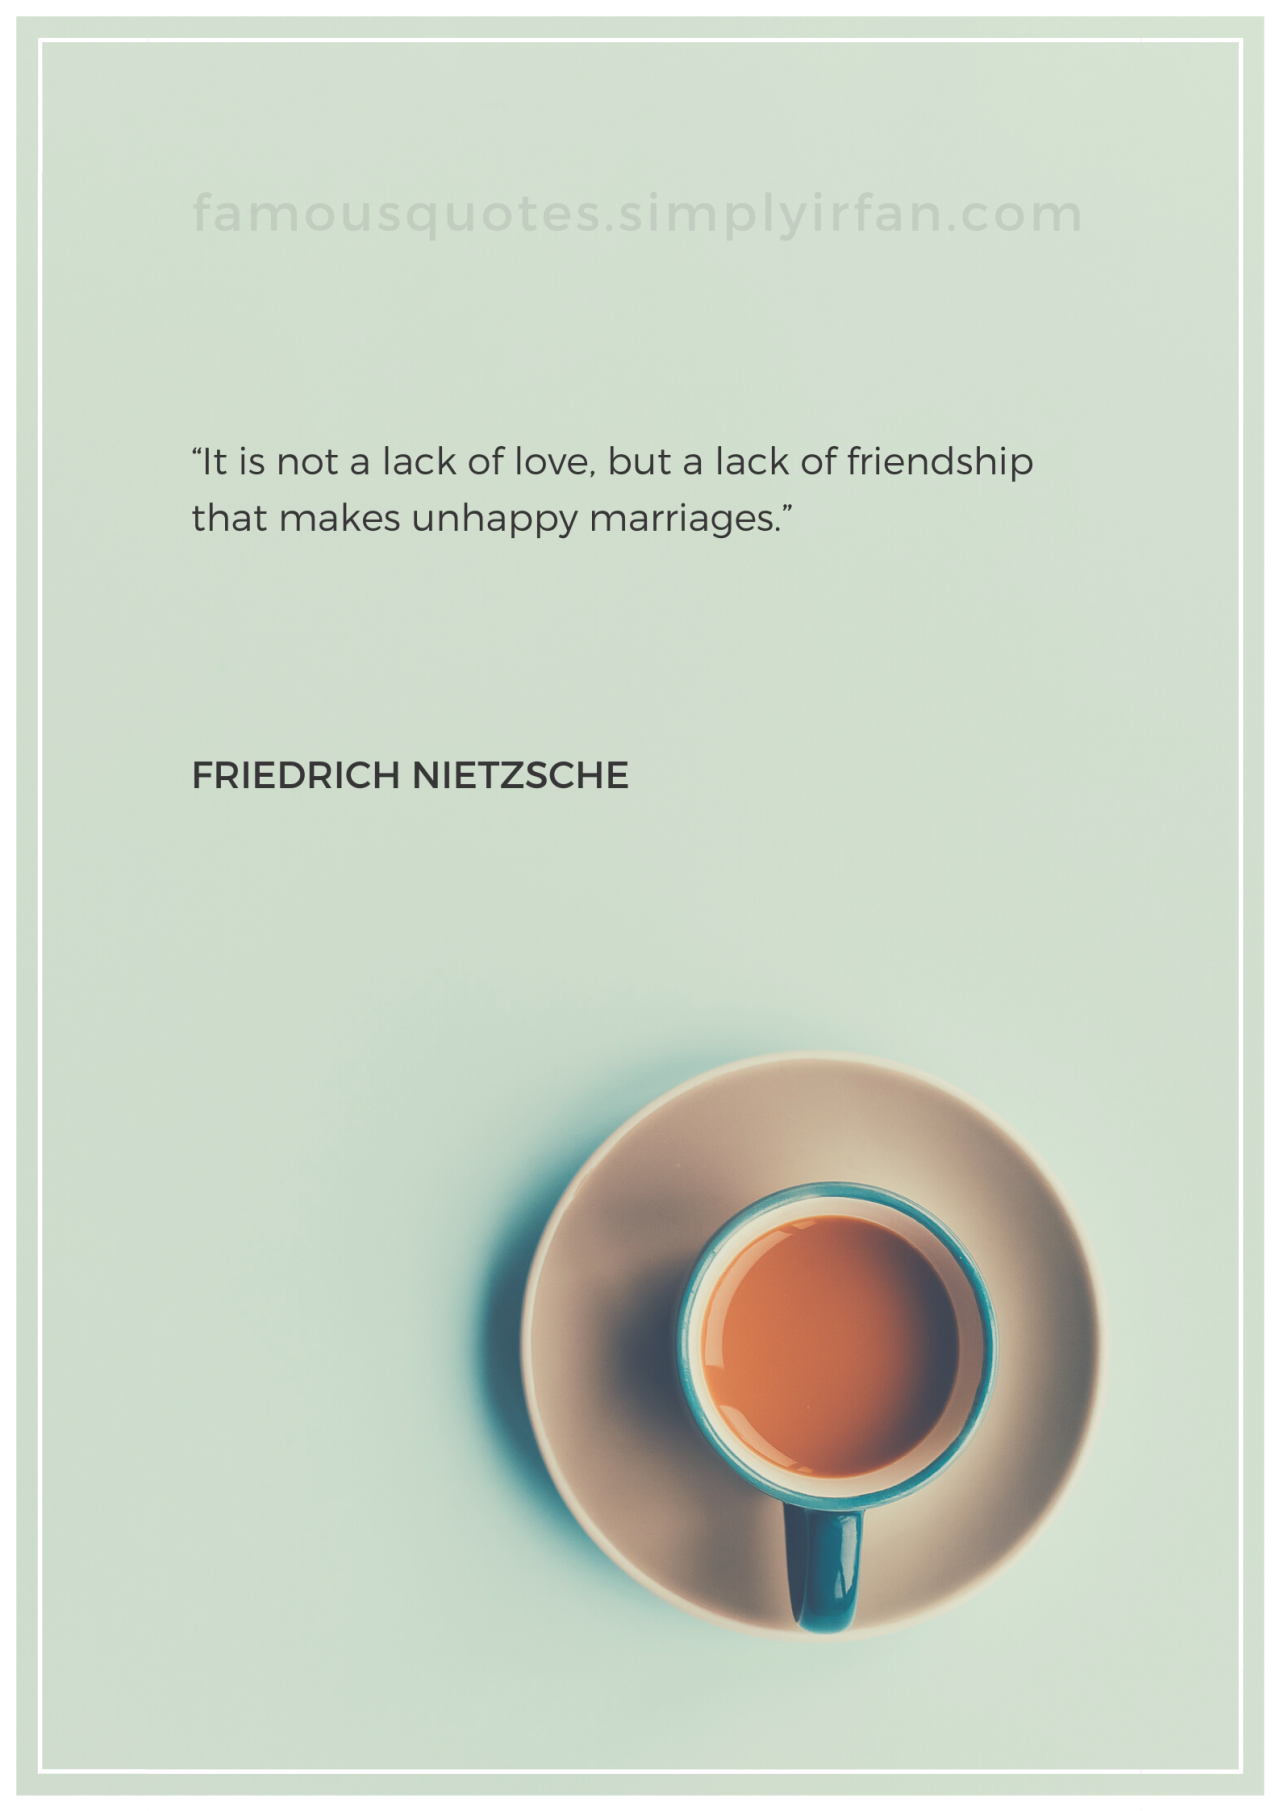 Famous Love Quote: "It is not a lack of love, but a lack of friendship that makes unhappy marriages." by Friedrich Nietzsche